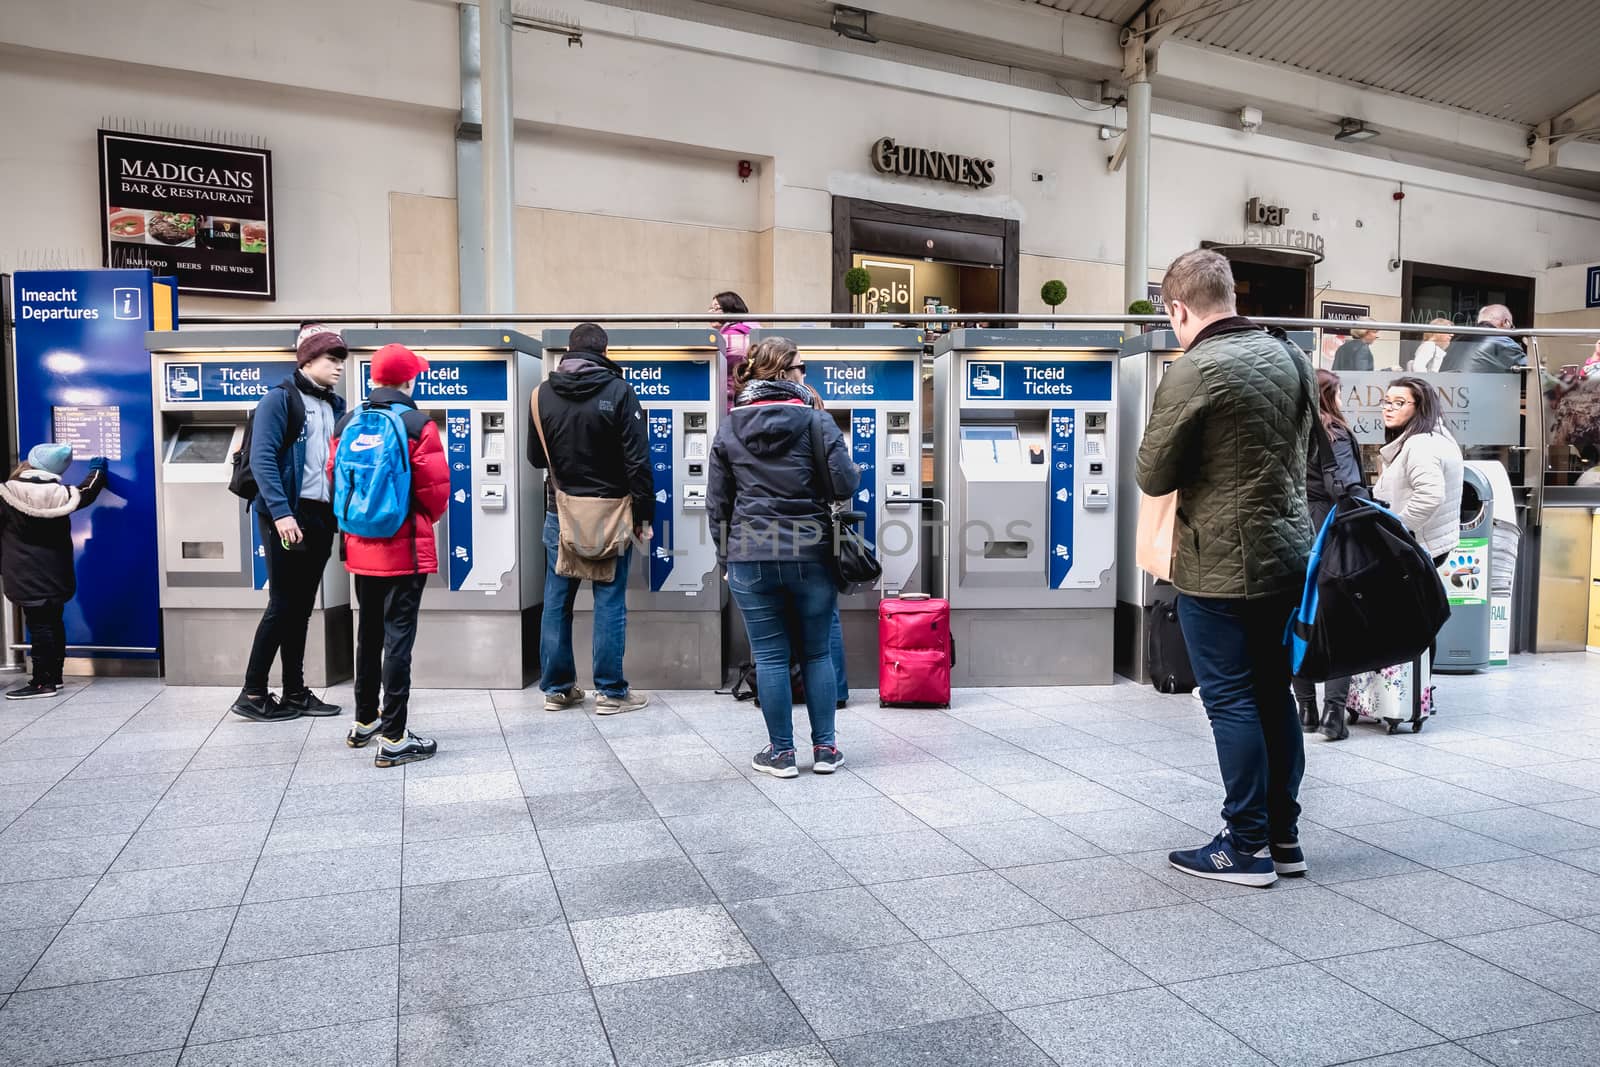 Passengers buying a ticket in the Connolly DART train station in by AtlanticEUROSTOXX